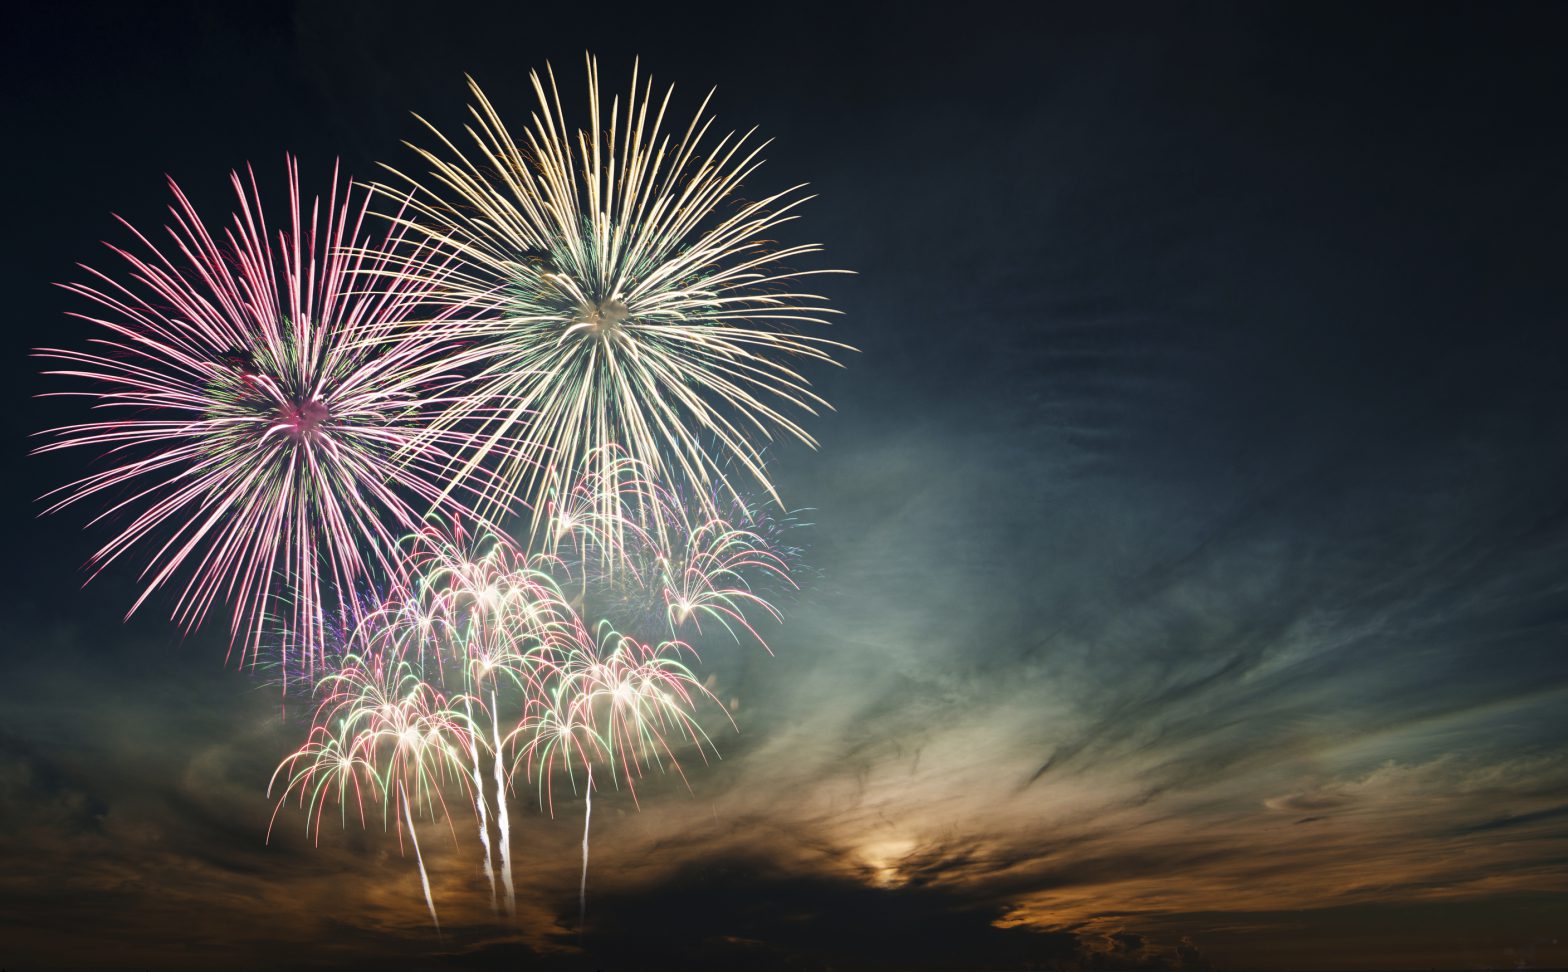 Content Marketing for the 4th of July